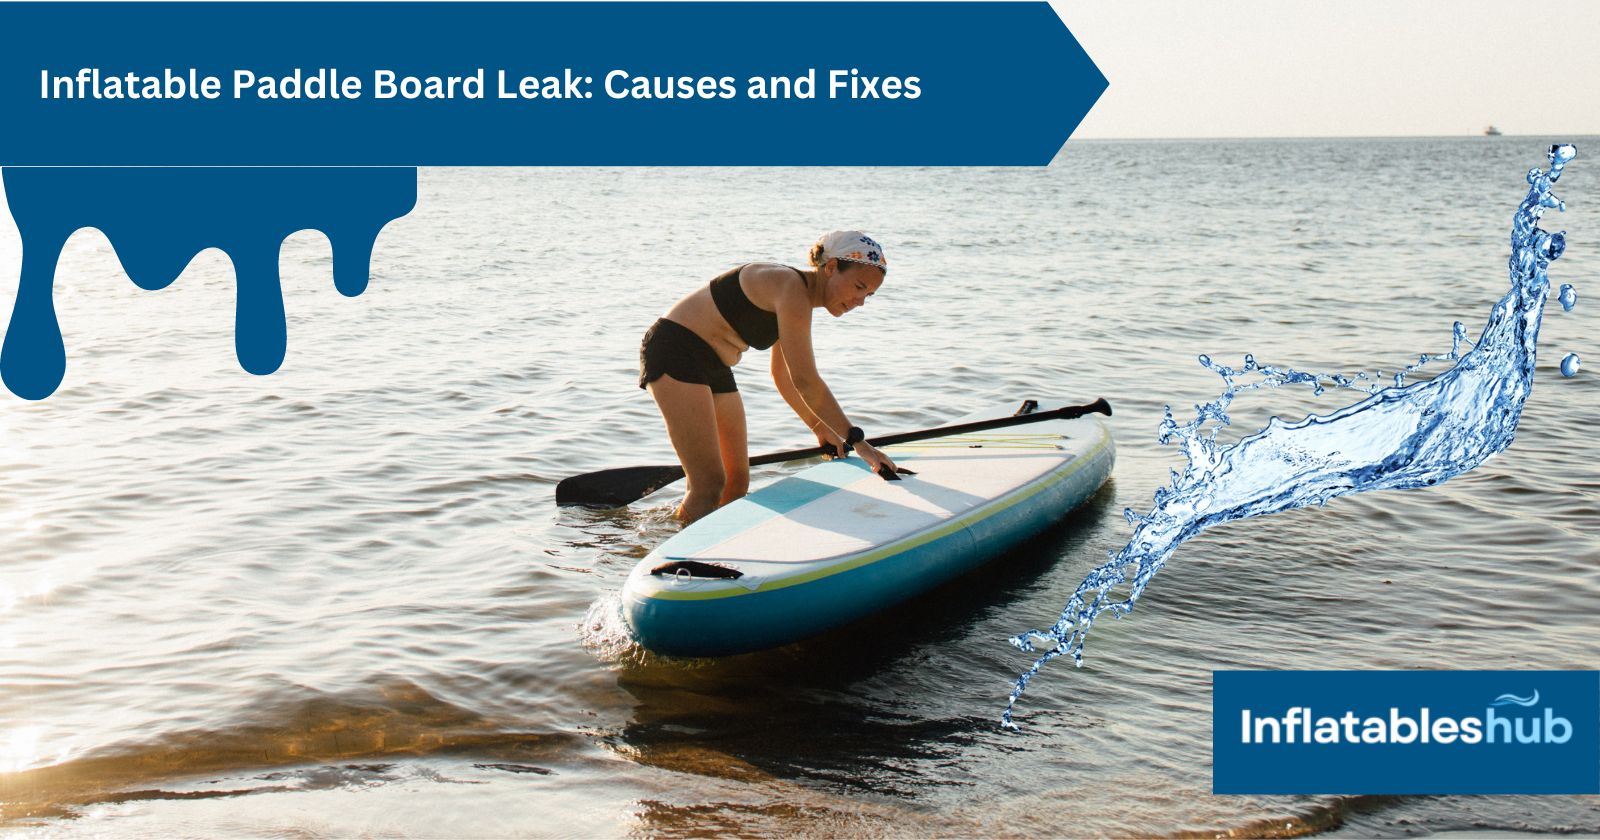 Inflatable Paddle Board Leak - Featured image